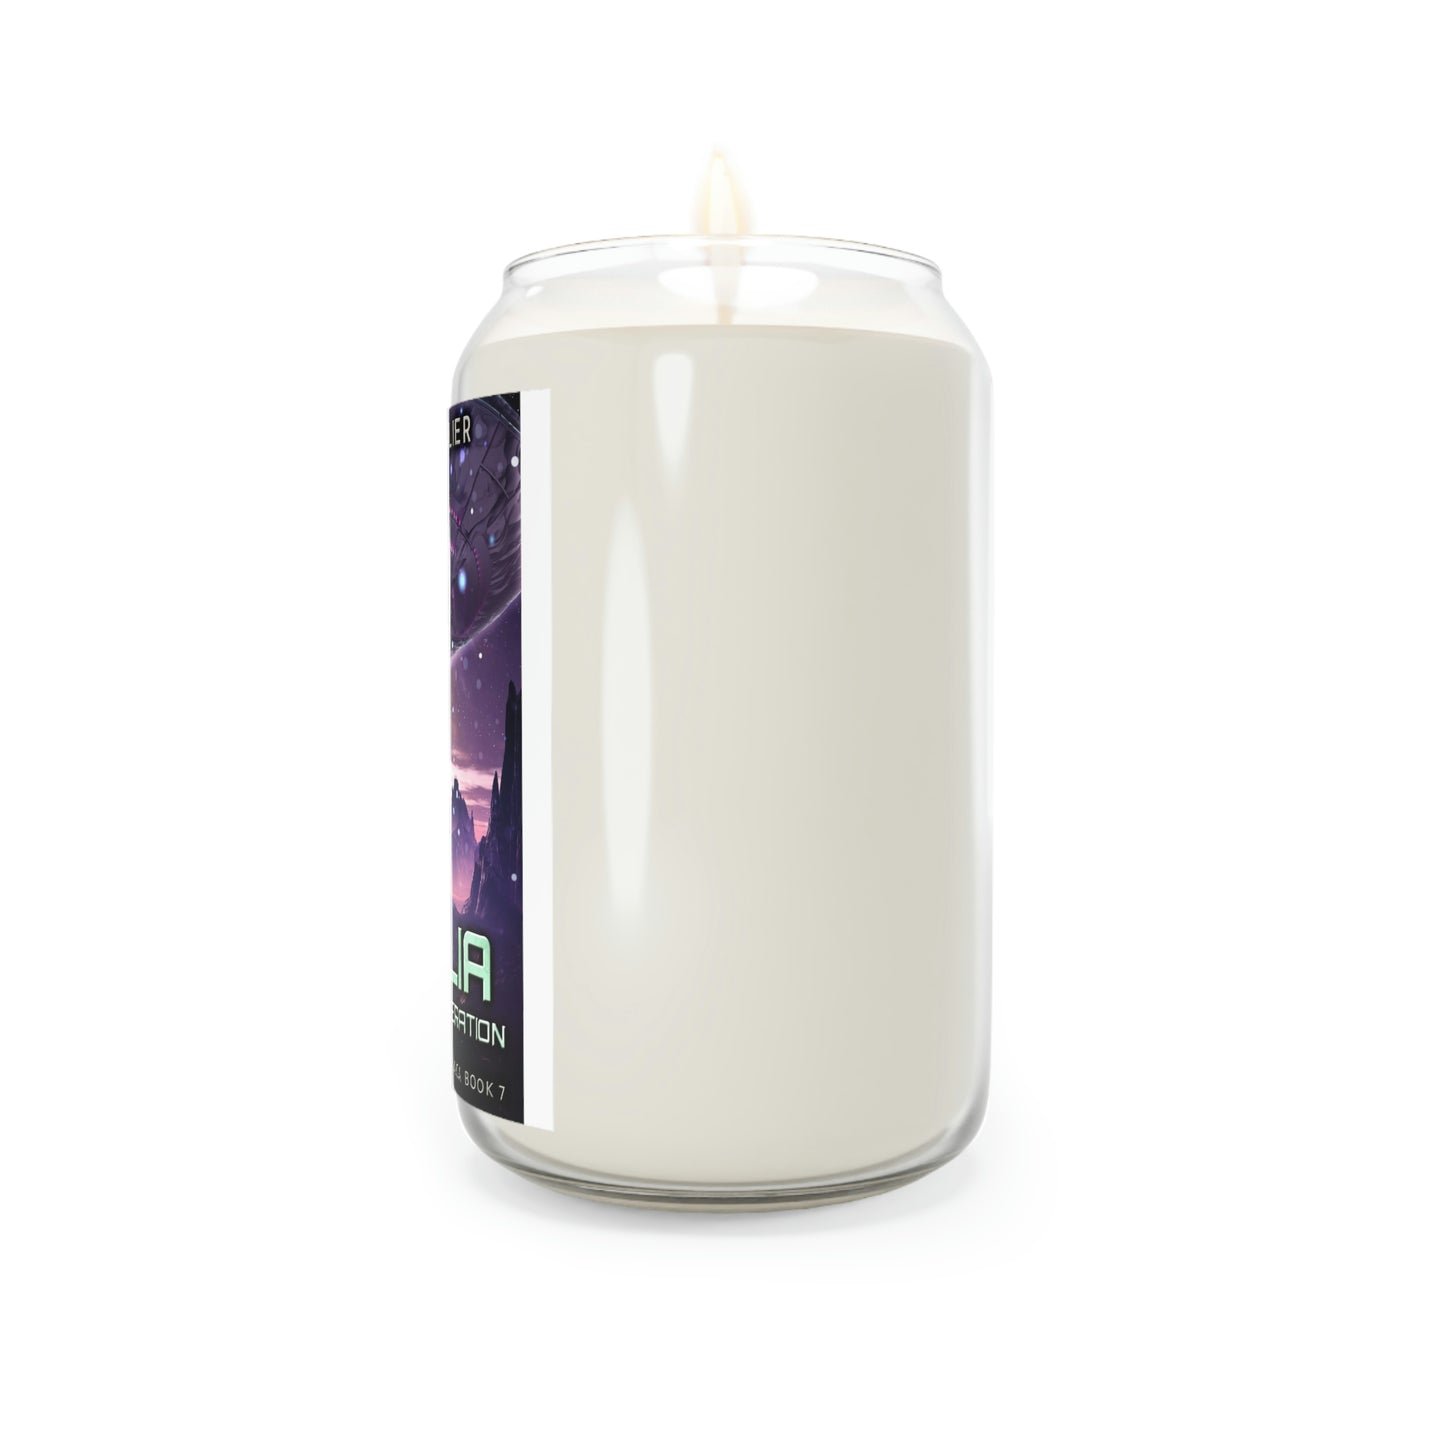 Thalia - The New Generation - Scented Candle